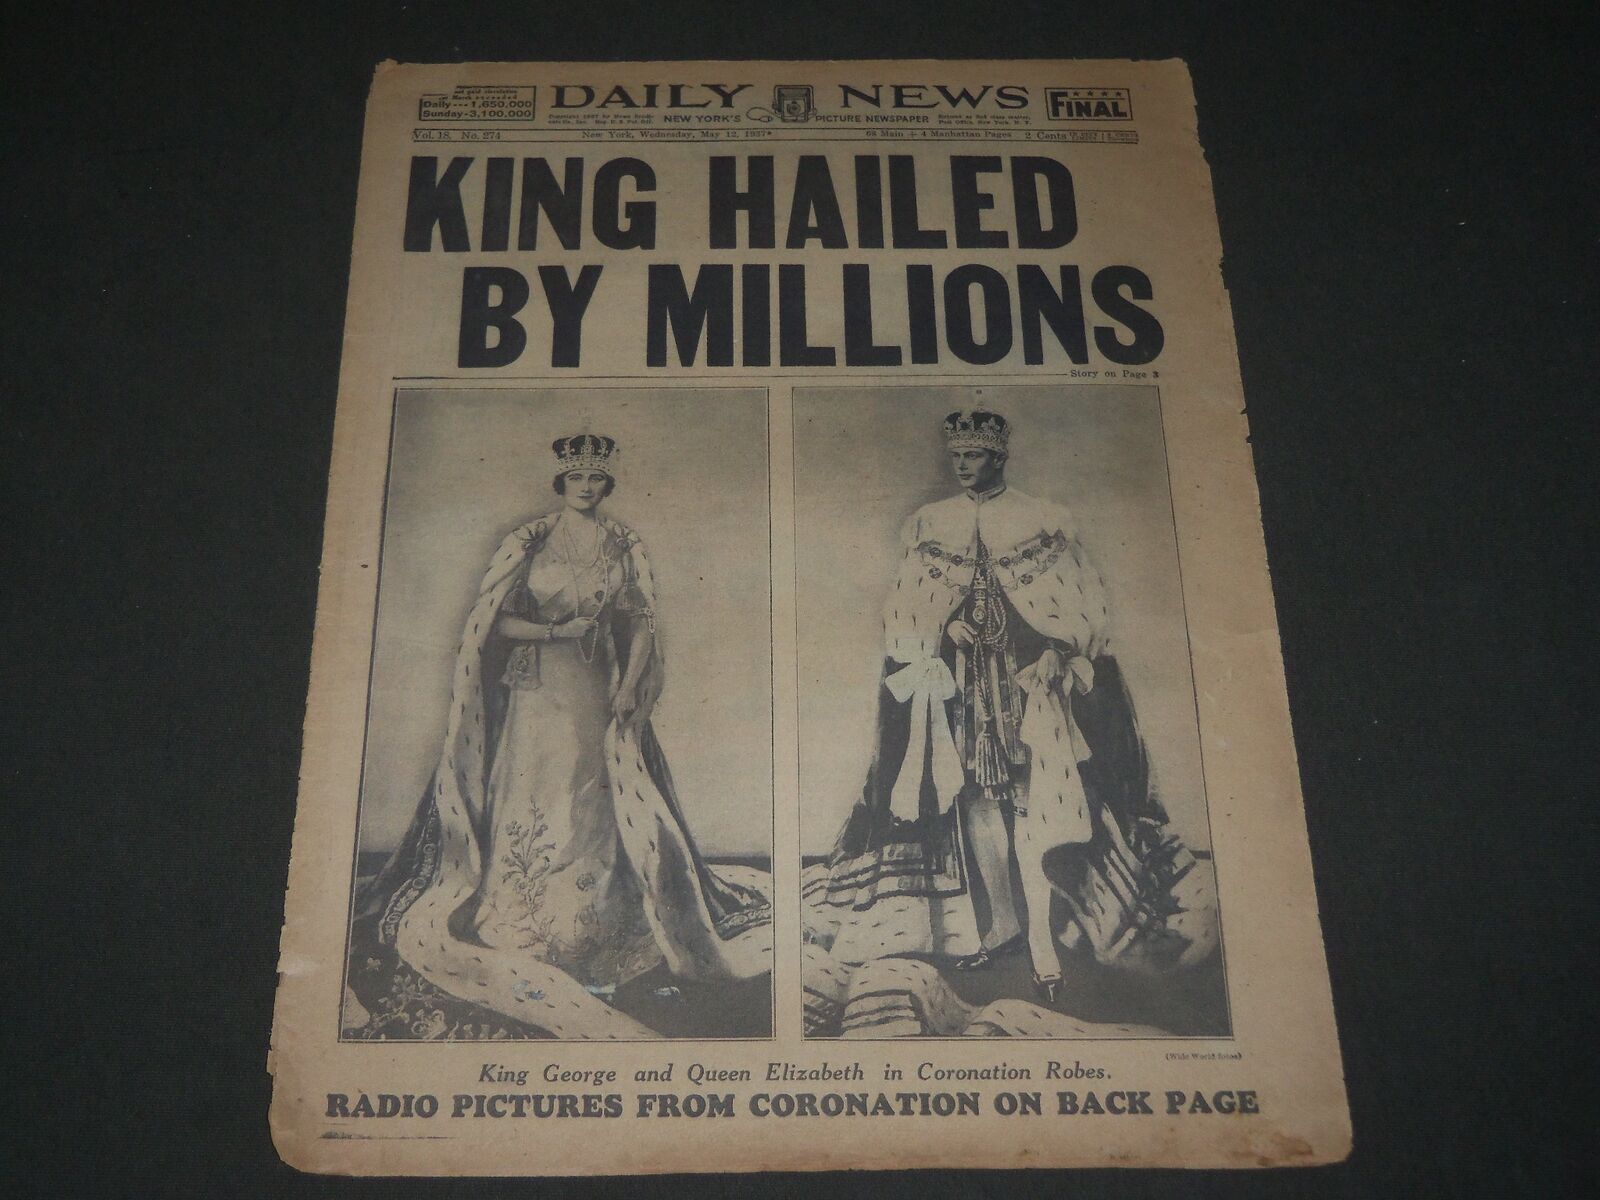 1937 MAY 12 NEW YORK DAILY NEWS - KING GEORGE HAILED BY MILLIONS - NP 2909